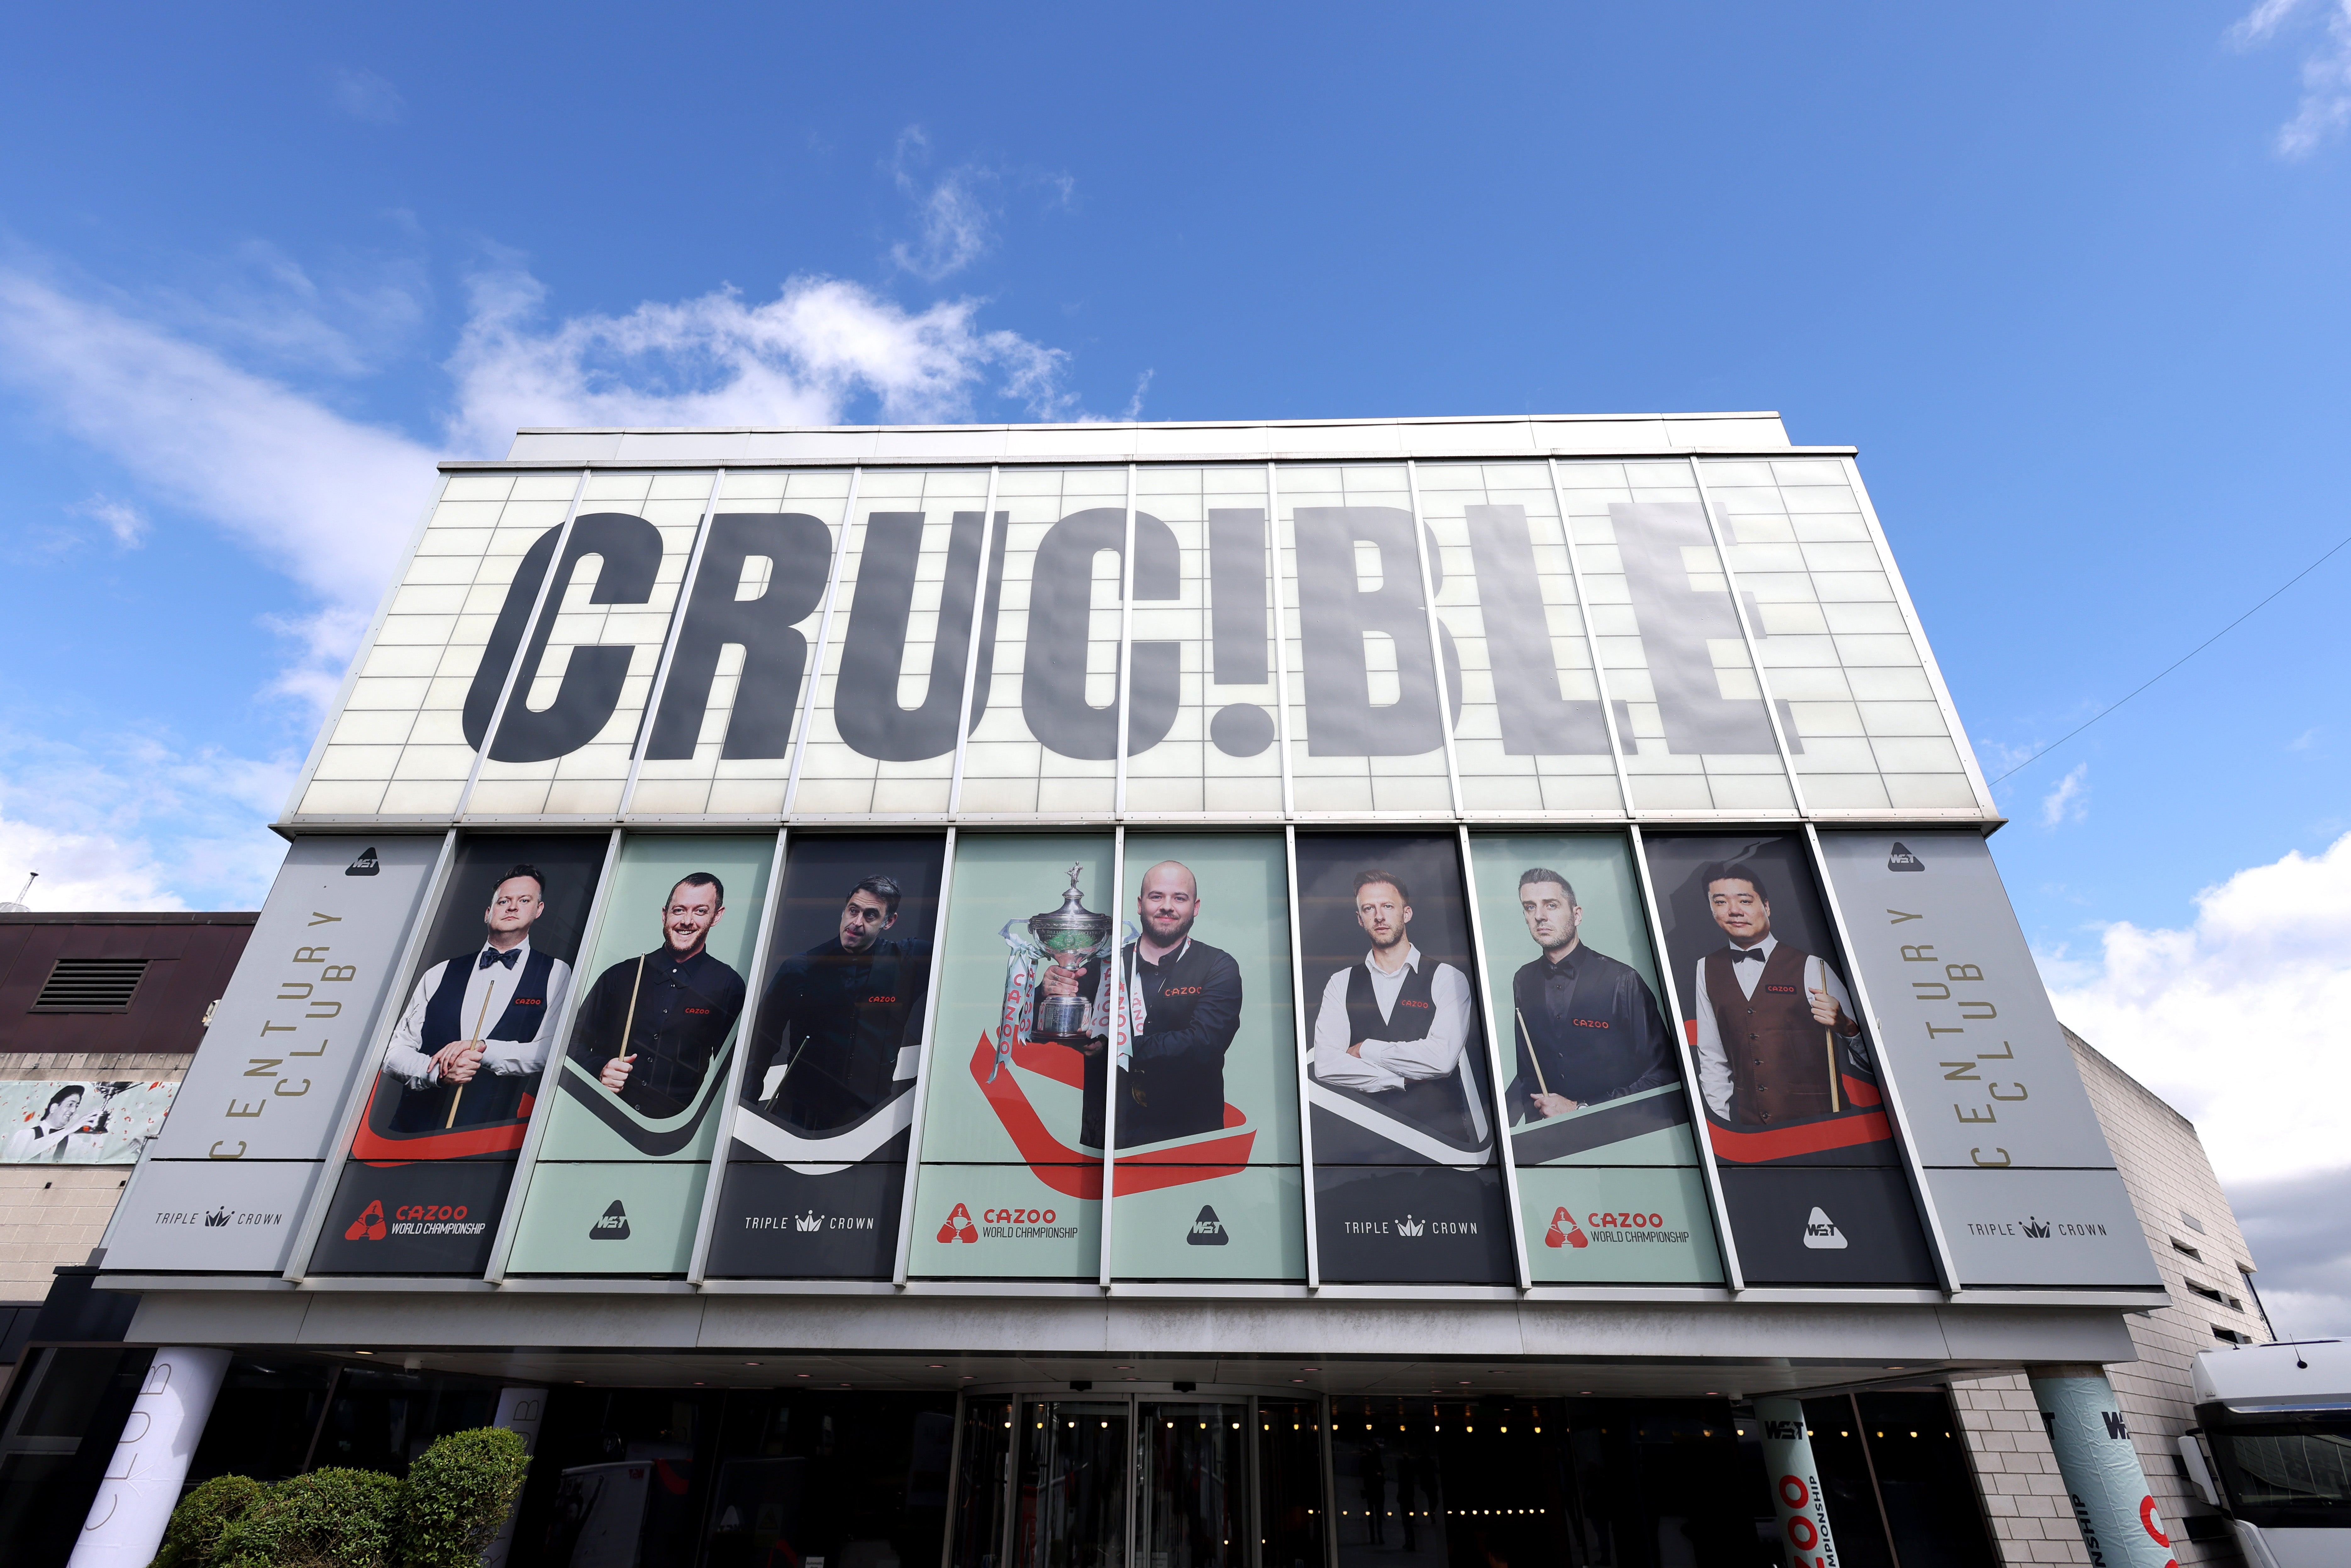 The Crucible Theatre has hosted the championships since 1977